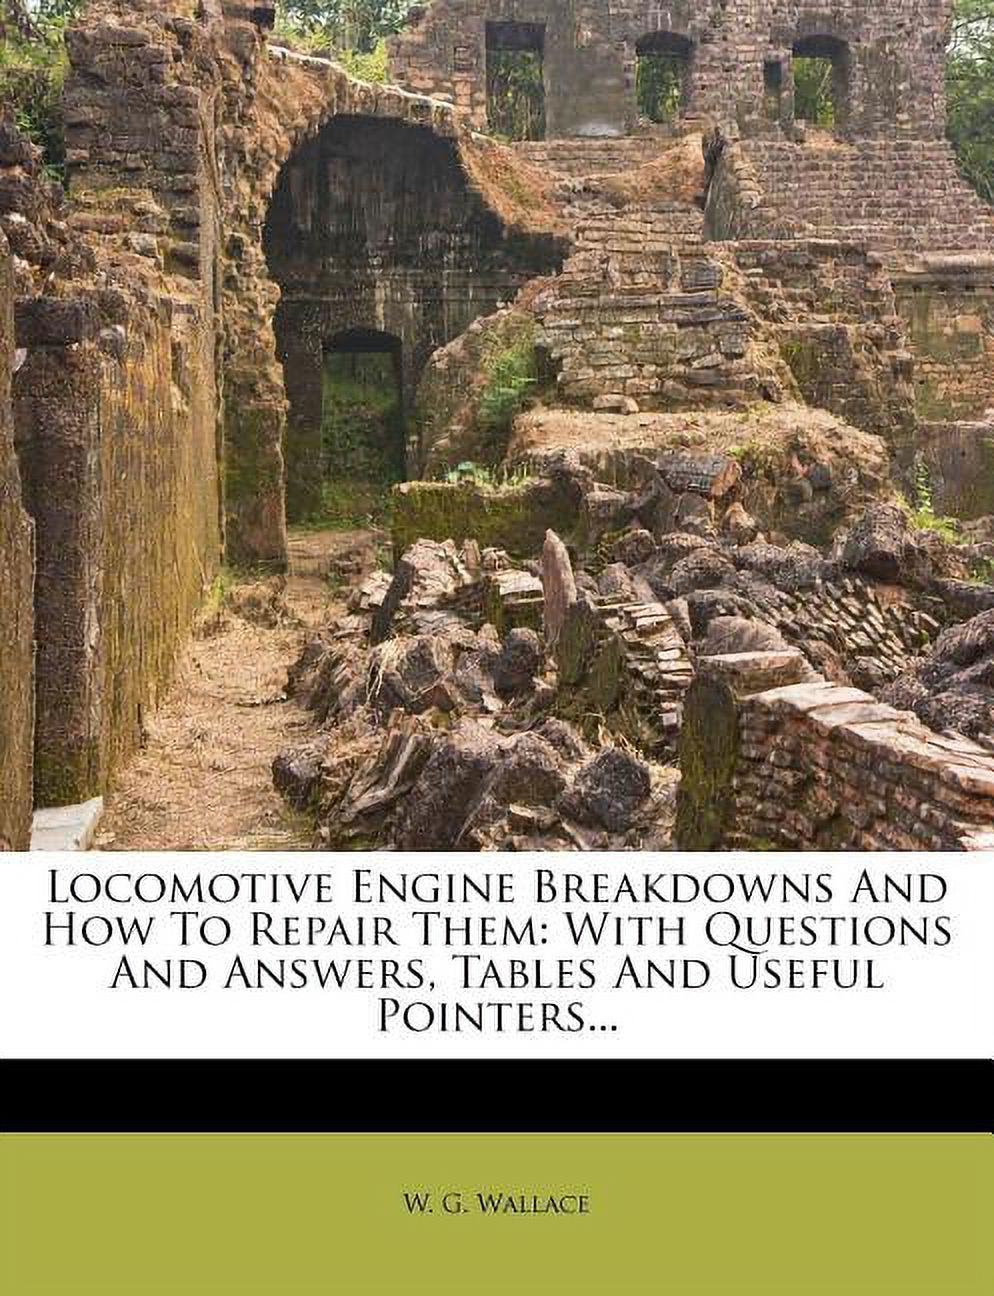 Locomotive Engine Breakdowns And How To Repair Them: With